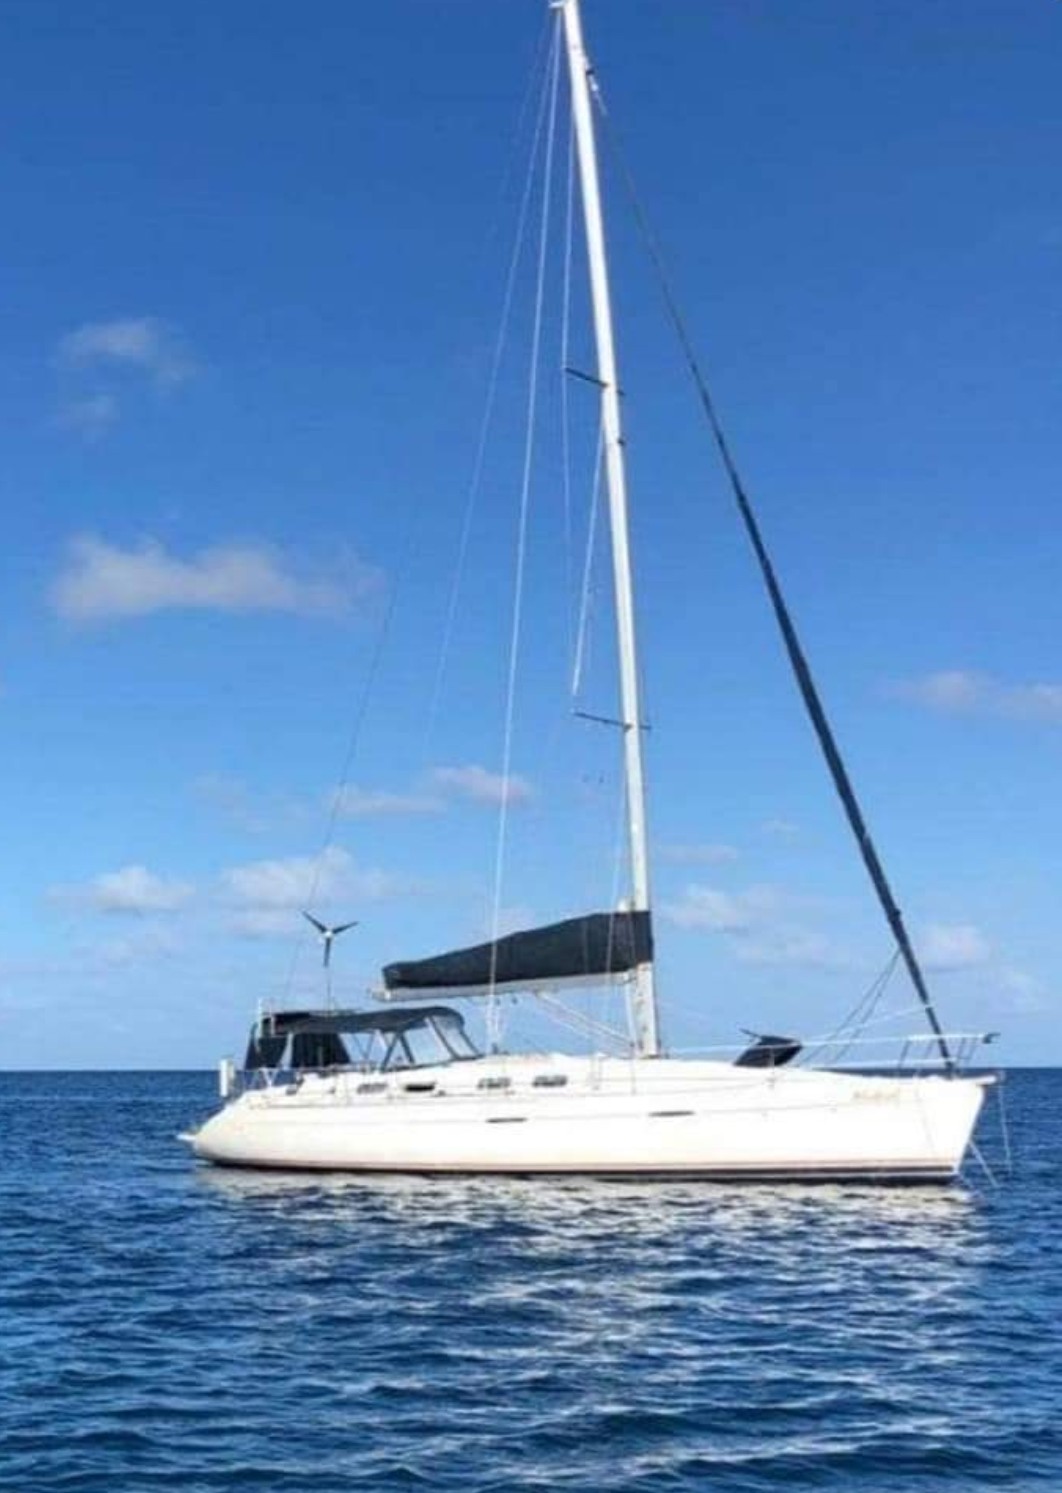 Used Beneteau Sailboats For Sale  by owner | 1996 42 foot Beneteau First 42s7 